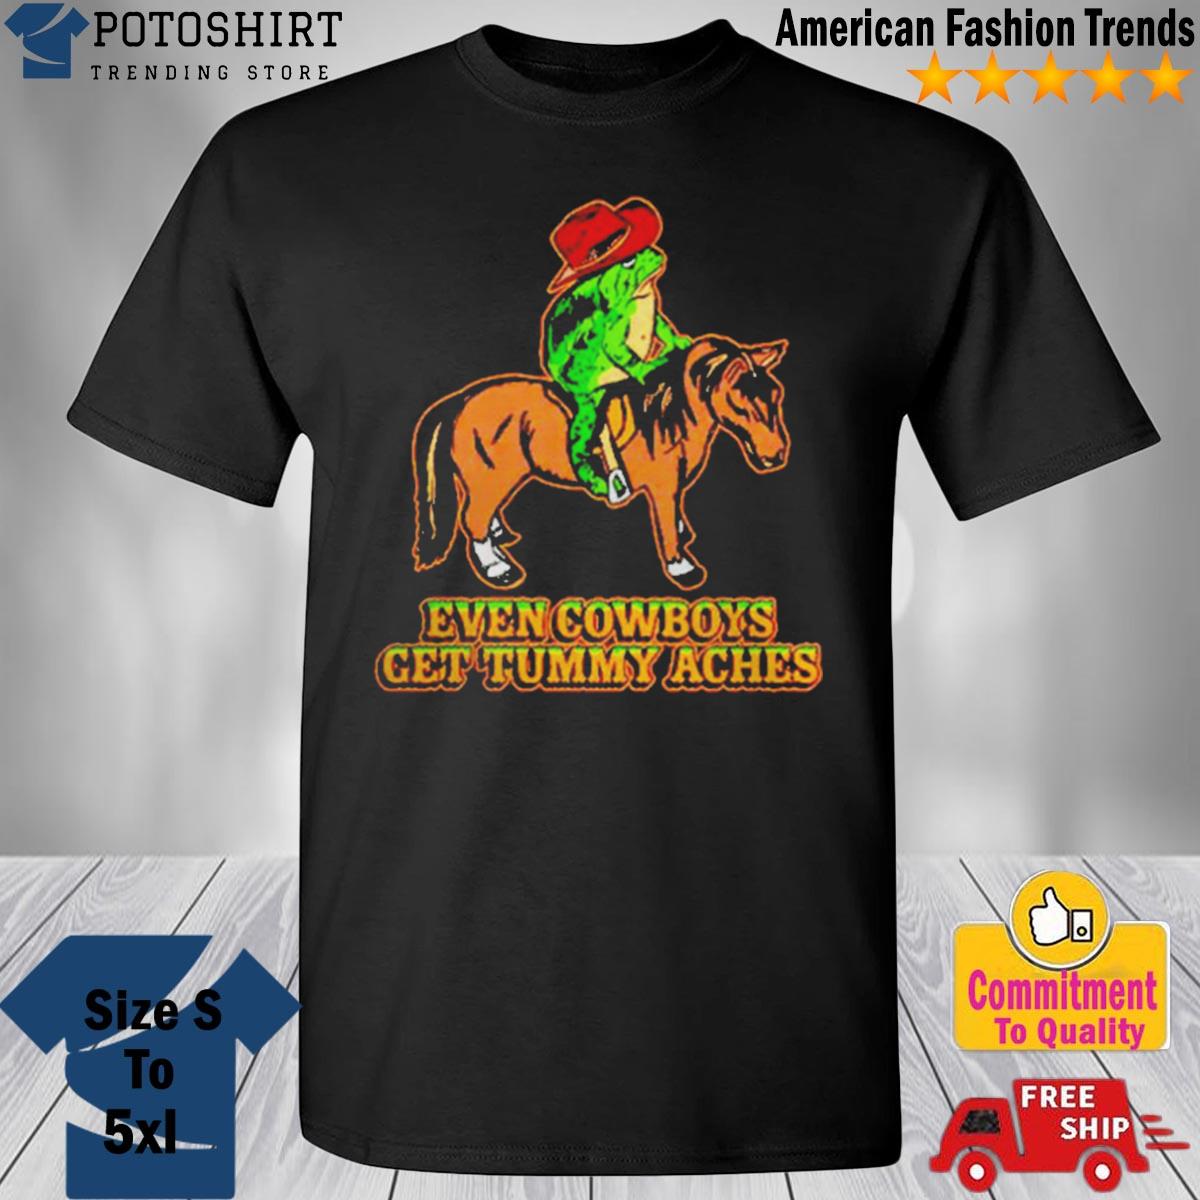 Product even Cowboys get tummy aches shirt